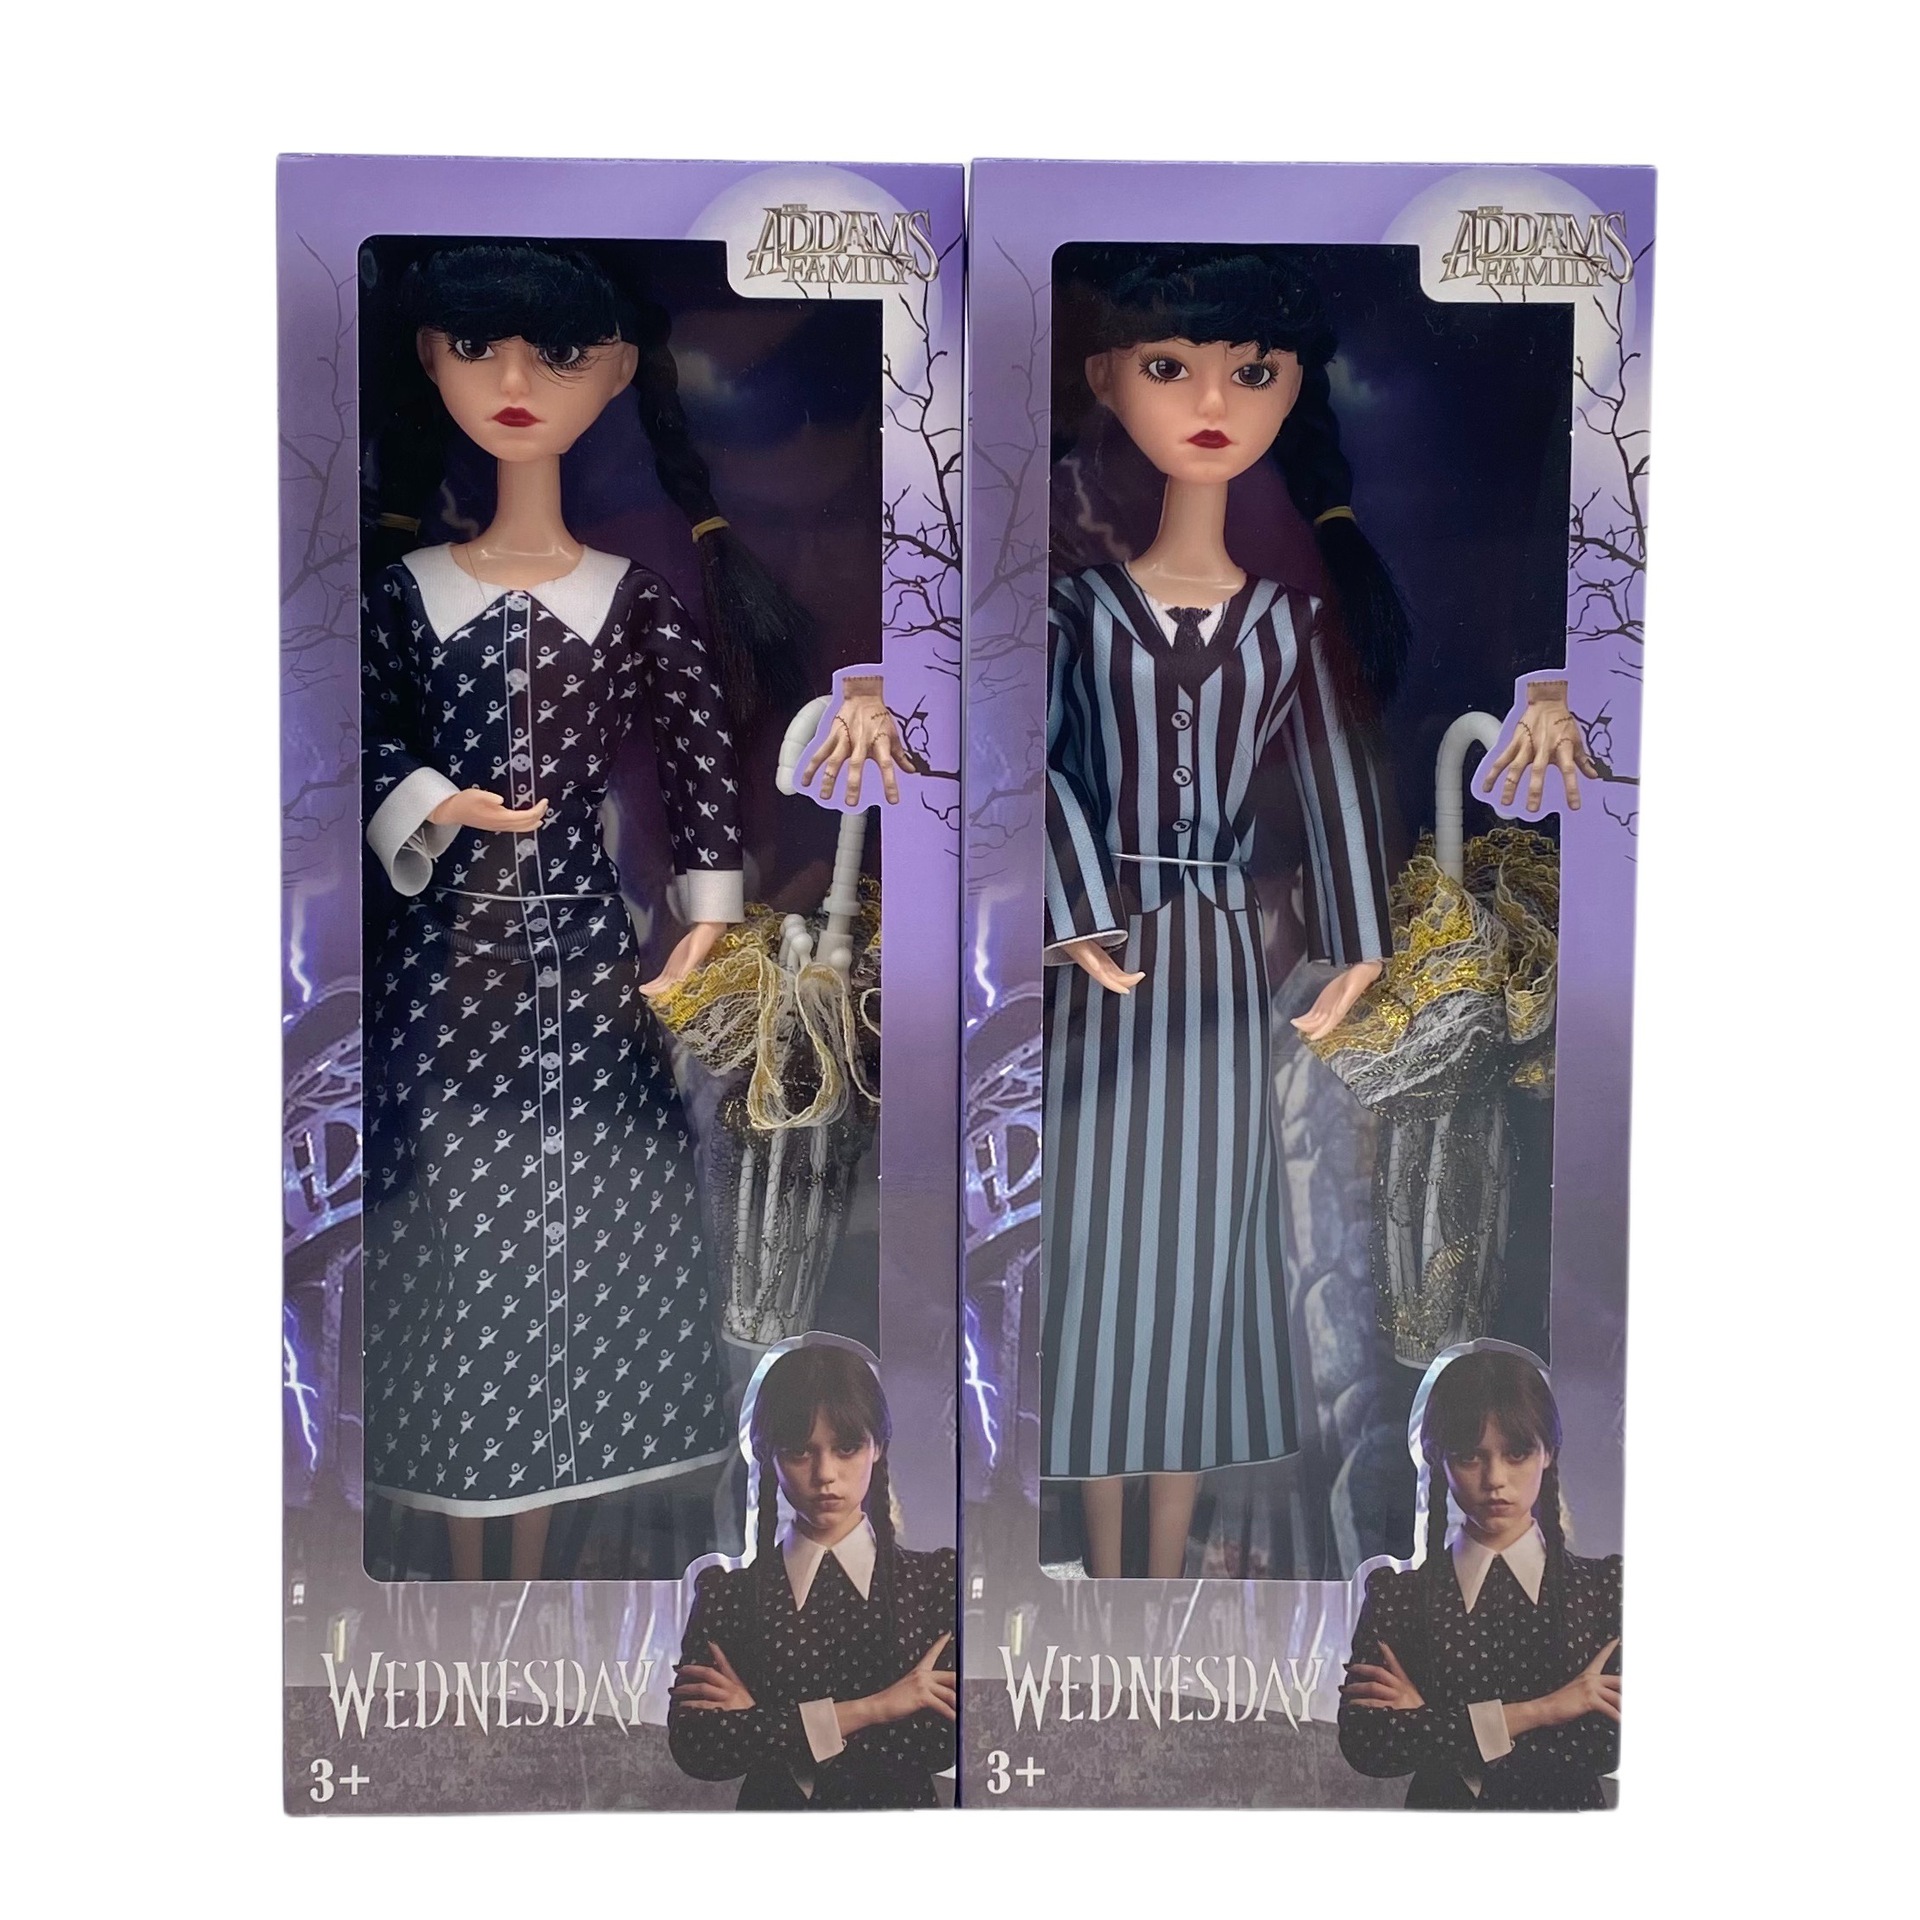 Loofamy Addams Family Doll: 11.5  Plastic Figure with Short Striped Dress, Ideal Gift for Girls and Fans